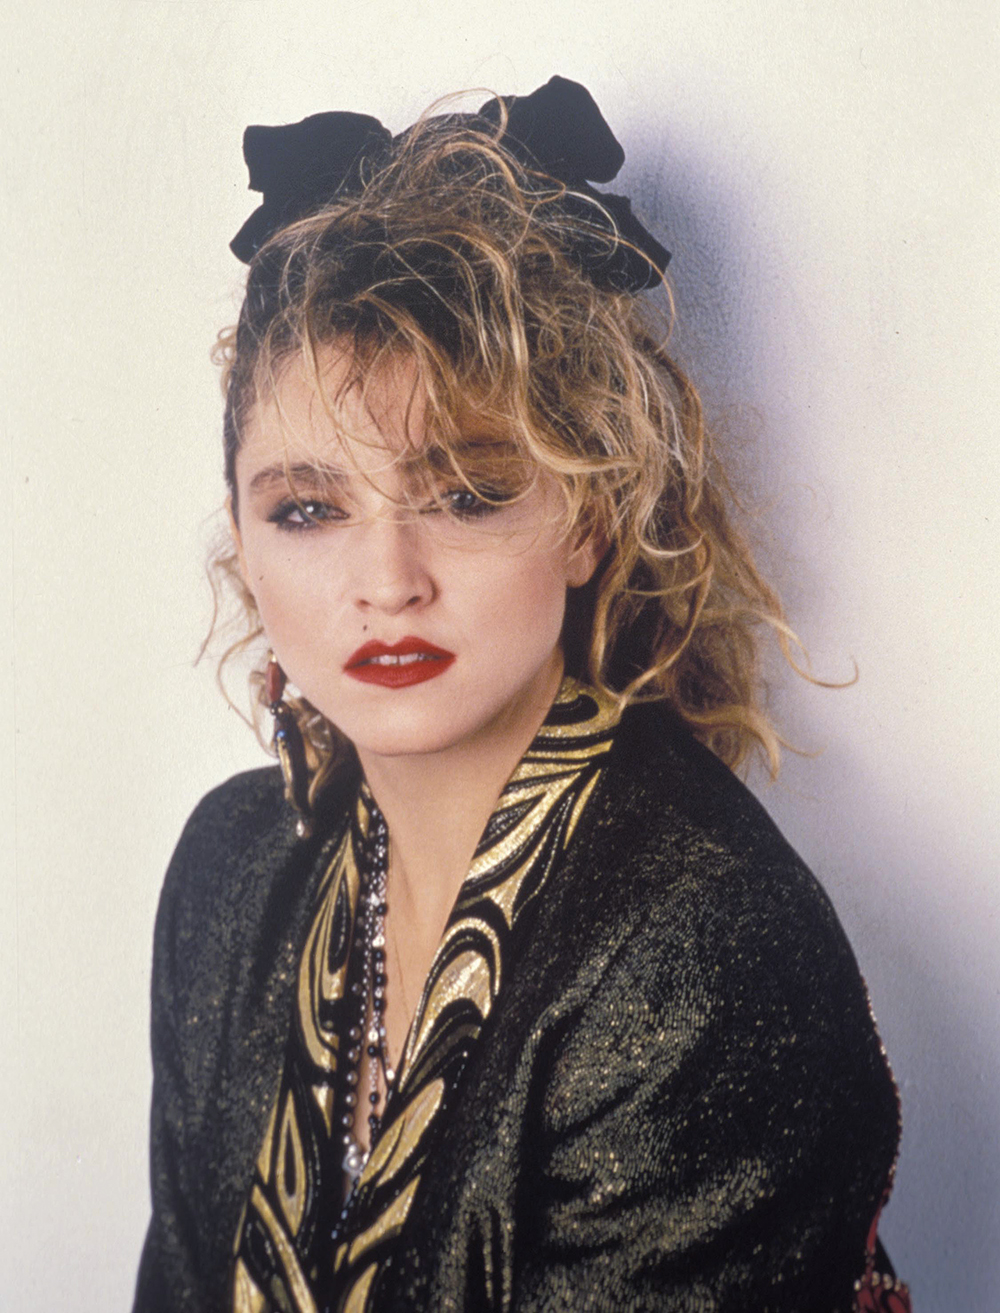 madonna hair in the 80s